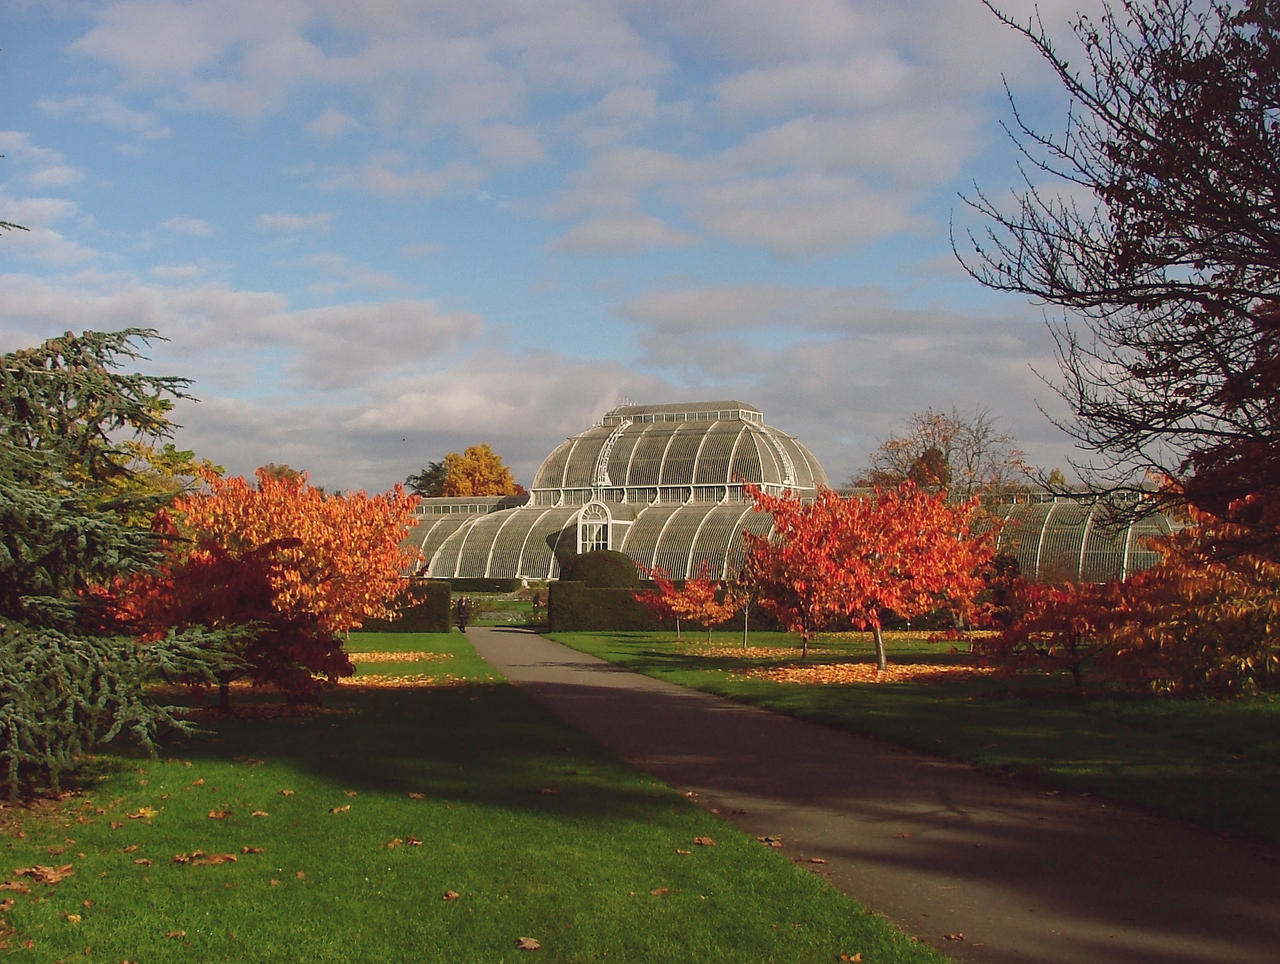 image otoño Londres a view of the palm house in kew gardens 2007 by aegiandyad d4q3u6l